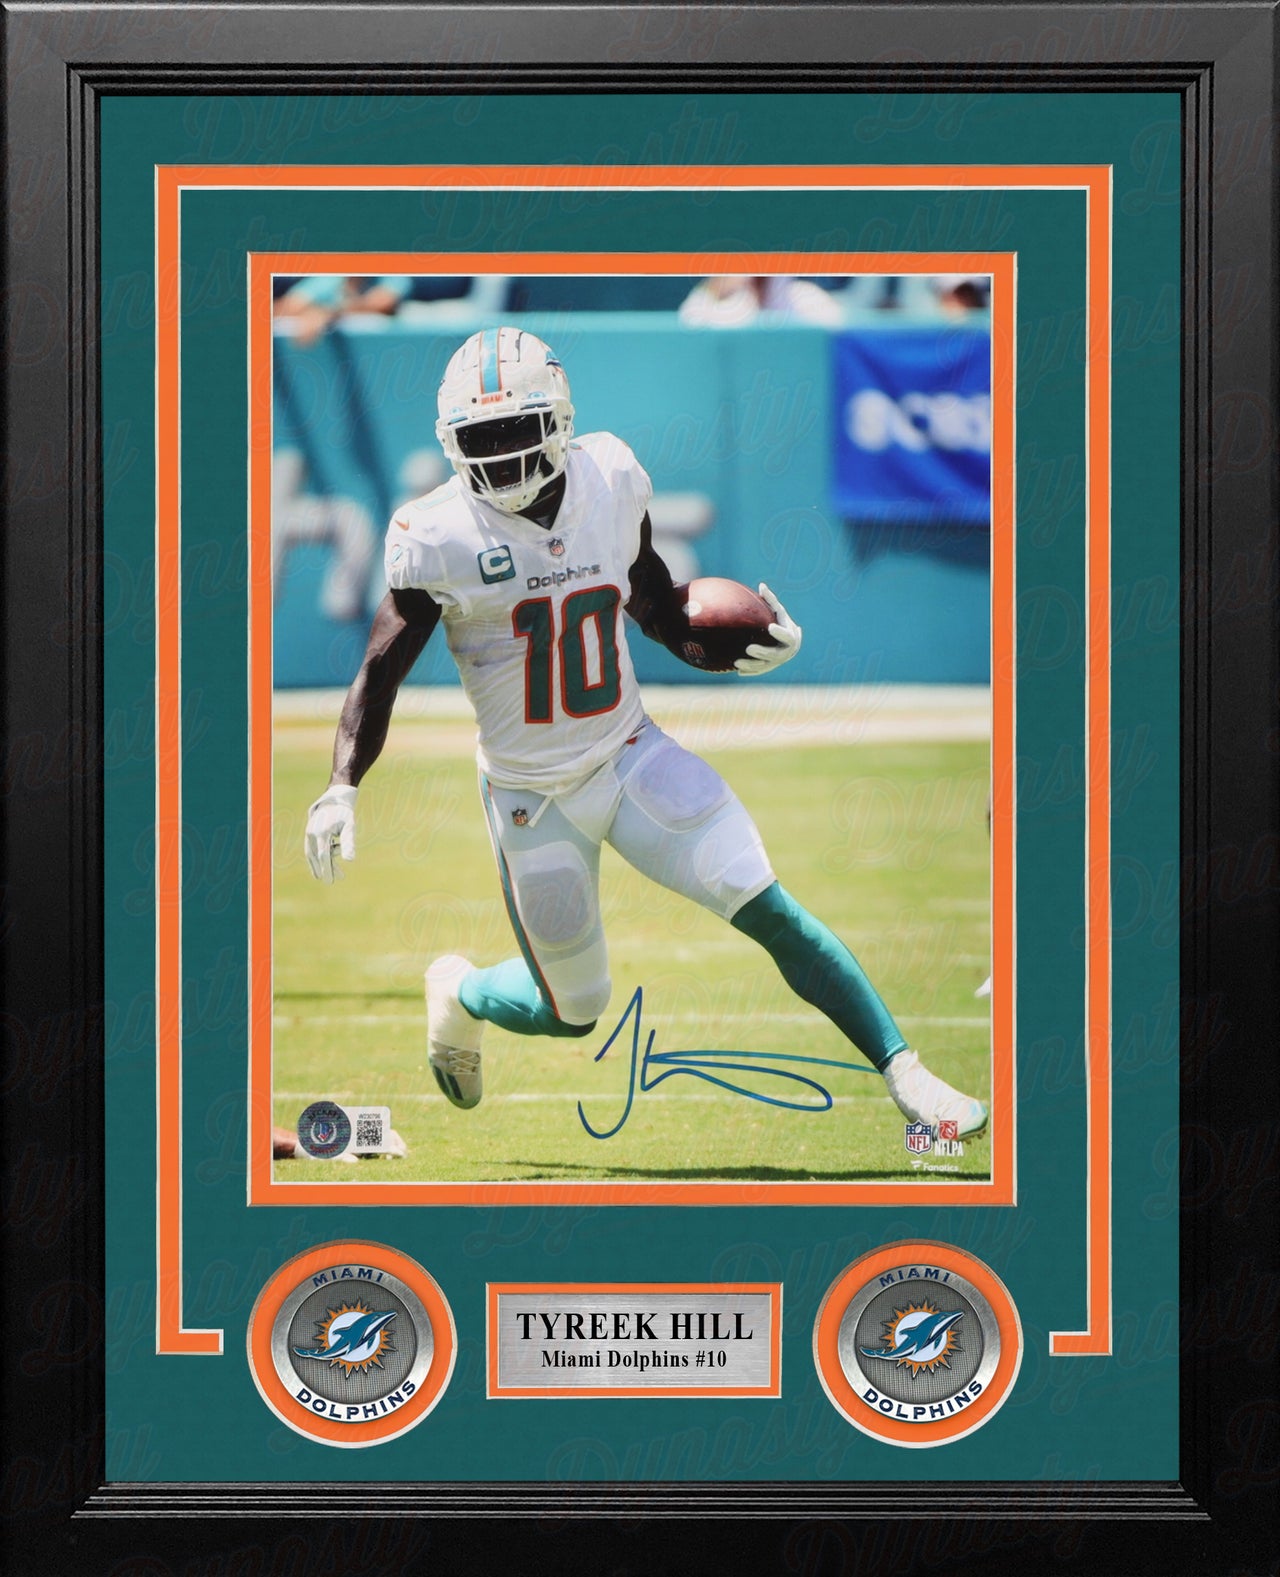 Tyreek Hill in Action Miami Dolphins Autographed 8" x 10" Framed Football Photo - Dynasty Sports & Framing 